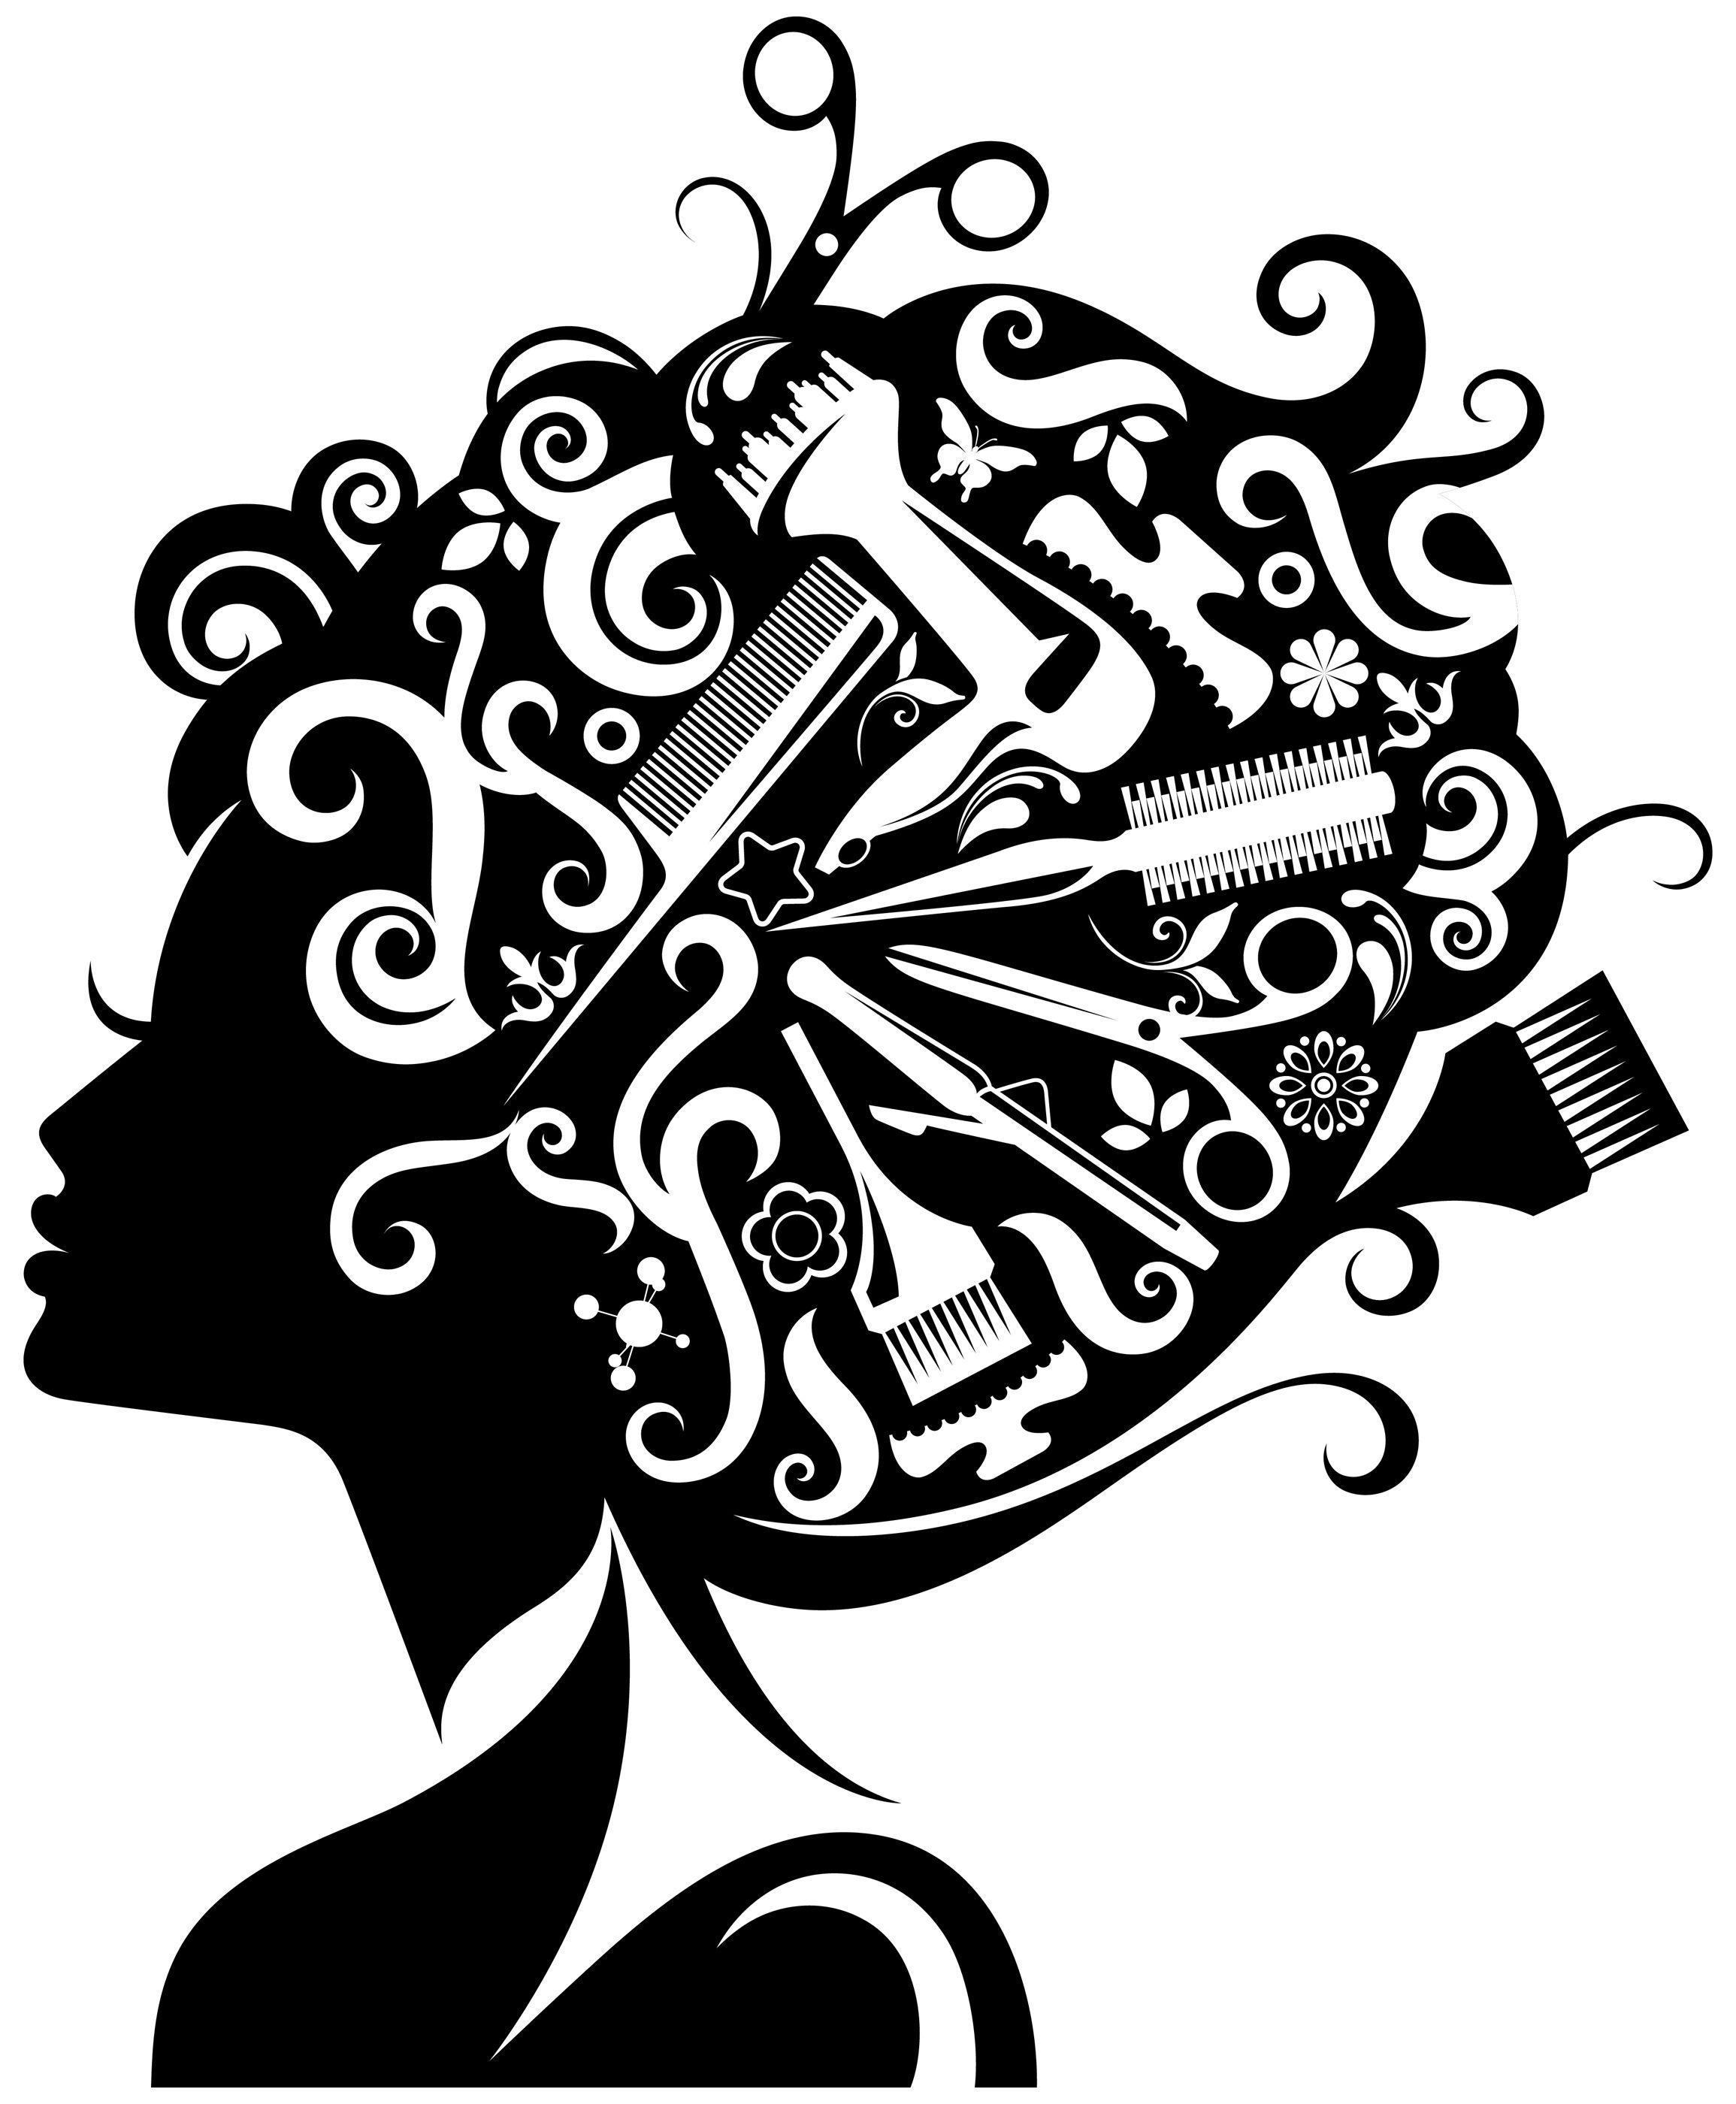 Cosmetologist Logo - The Owl Bookshop - The SPA at Citrus